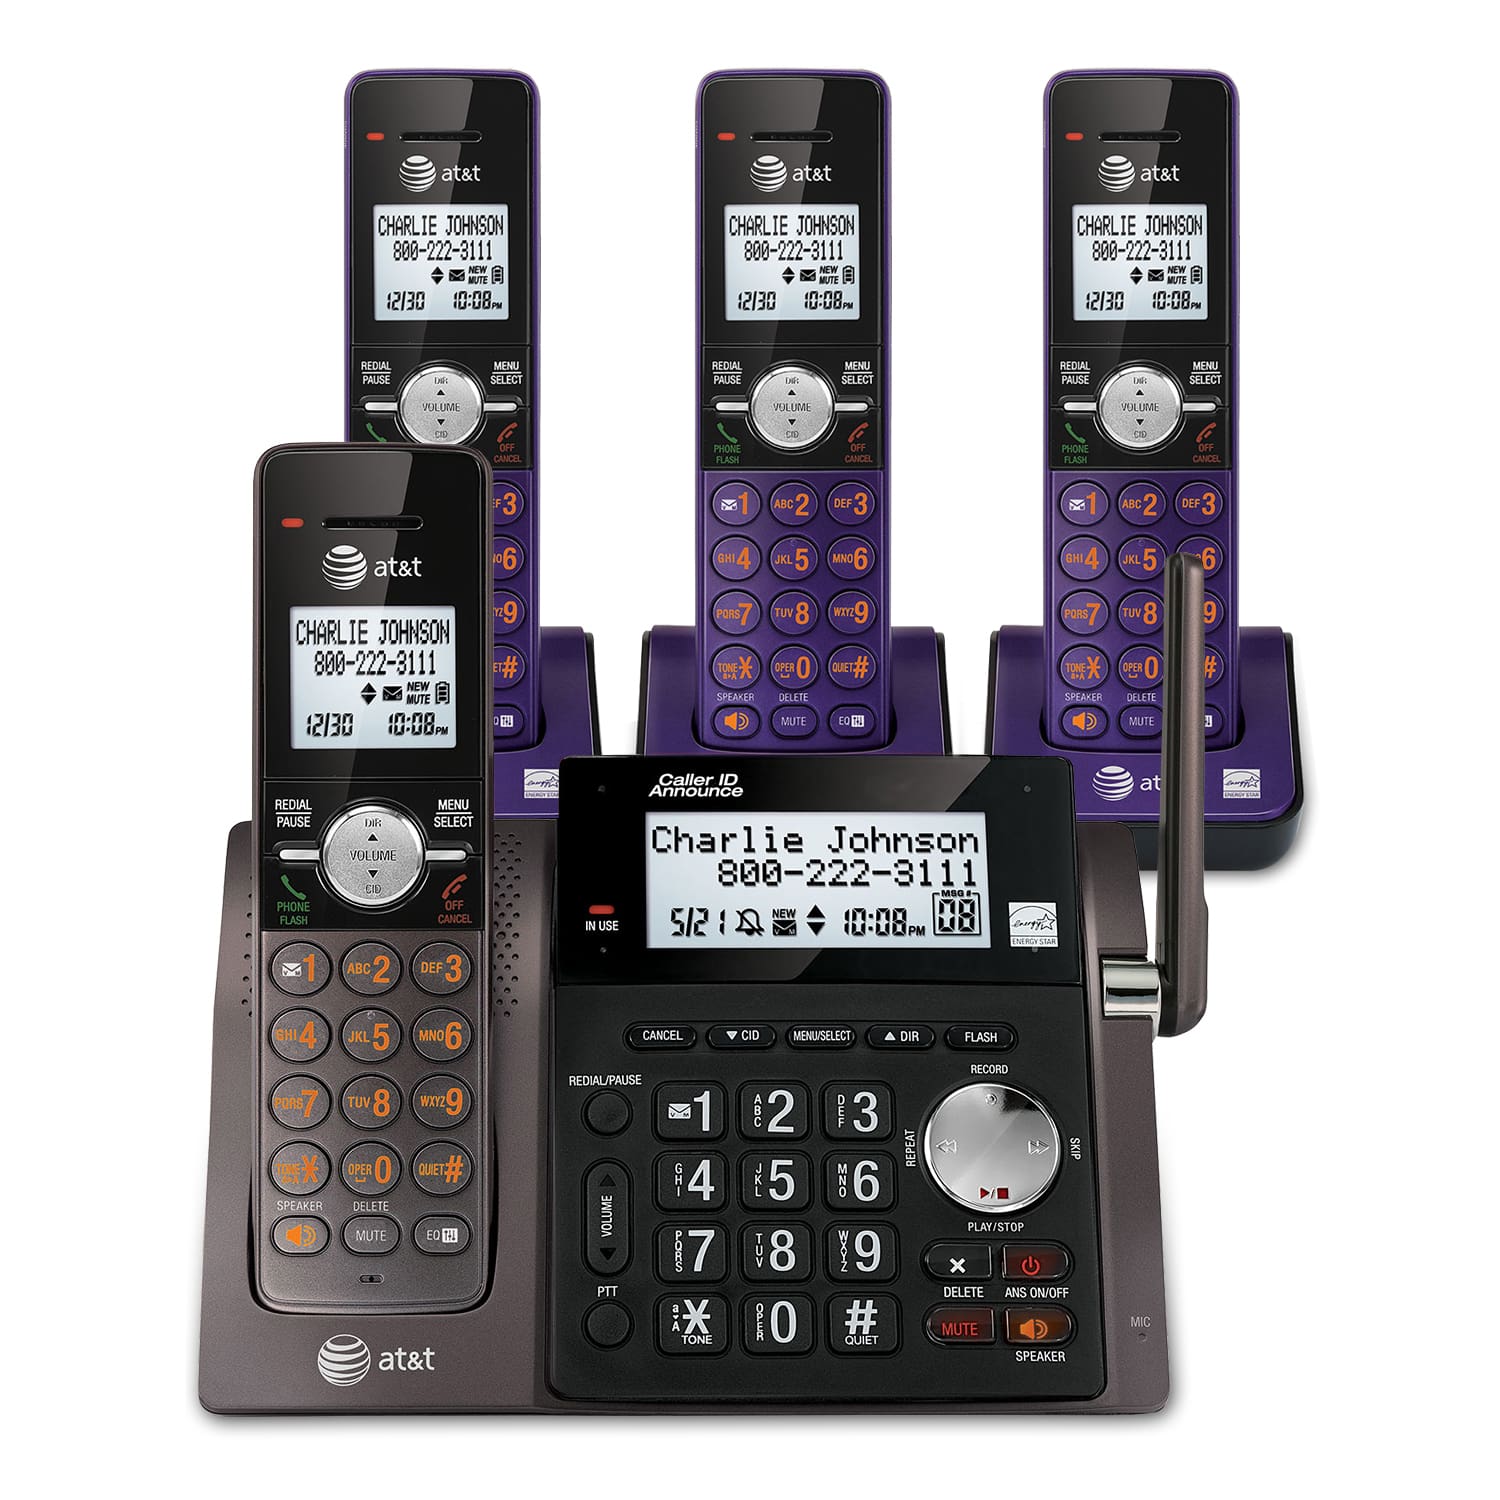 4 handset cordless answering system with caller ID/call waiting - view 1